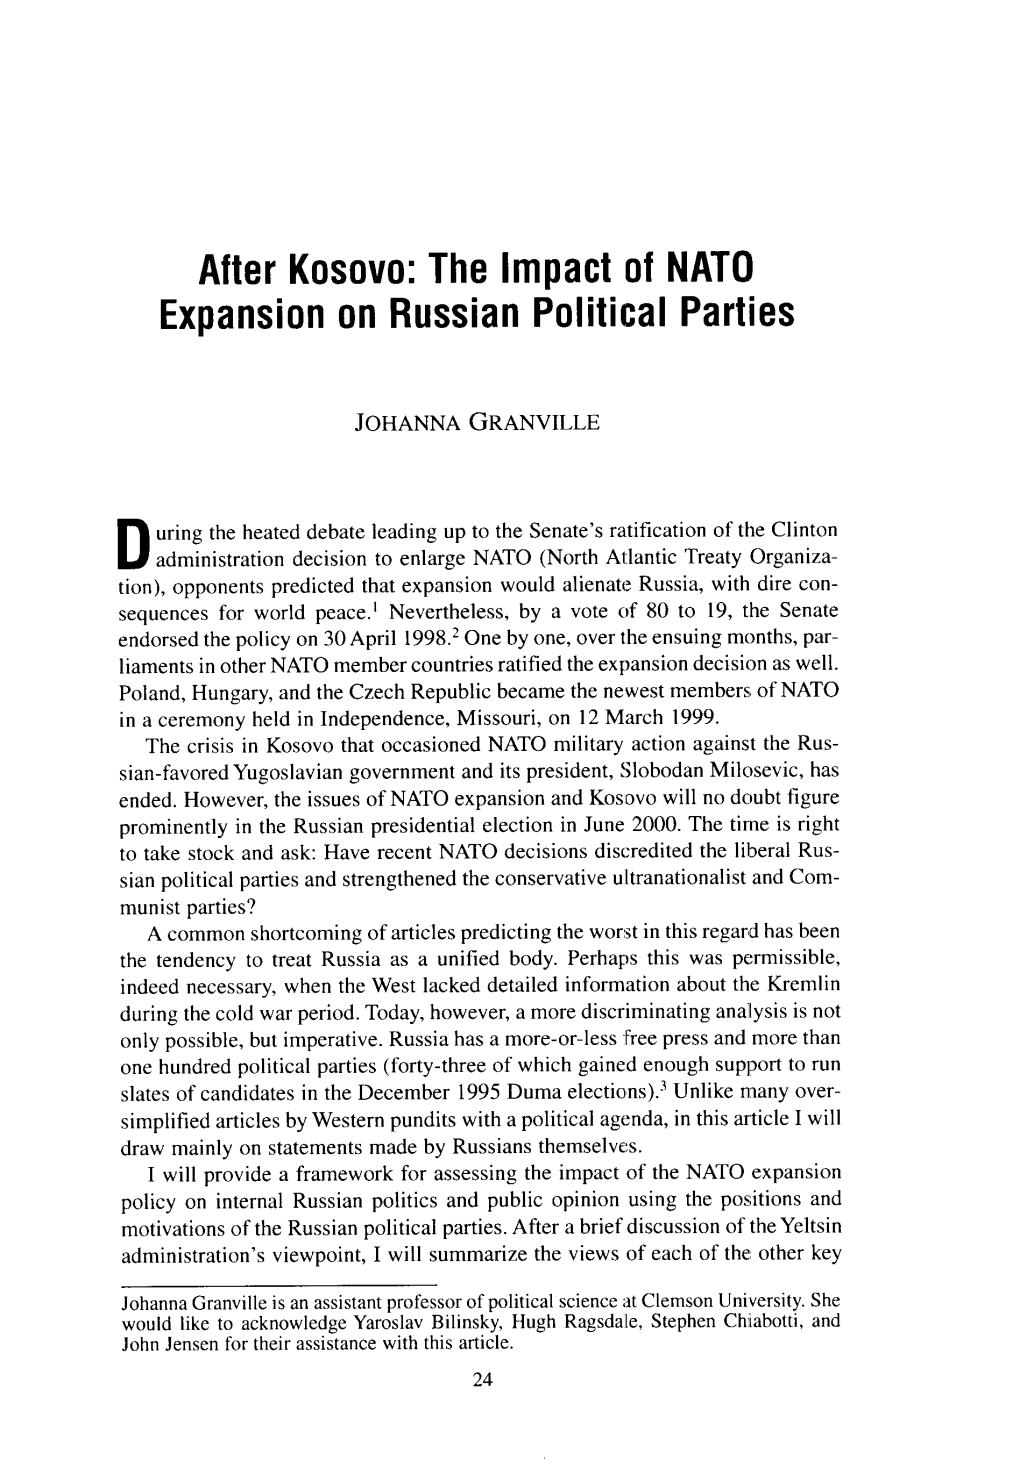 The Impact of NATO Expansion on Russian Political Parties